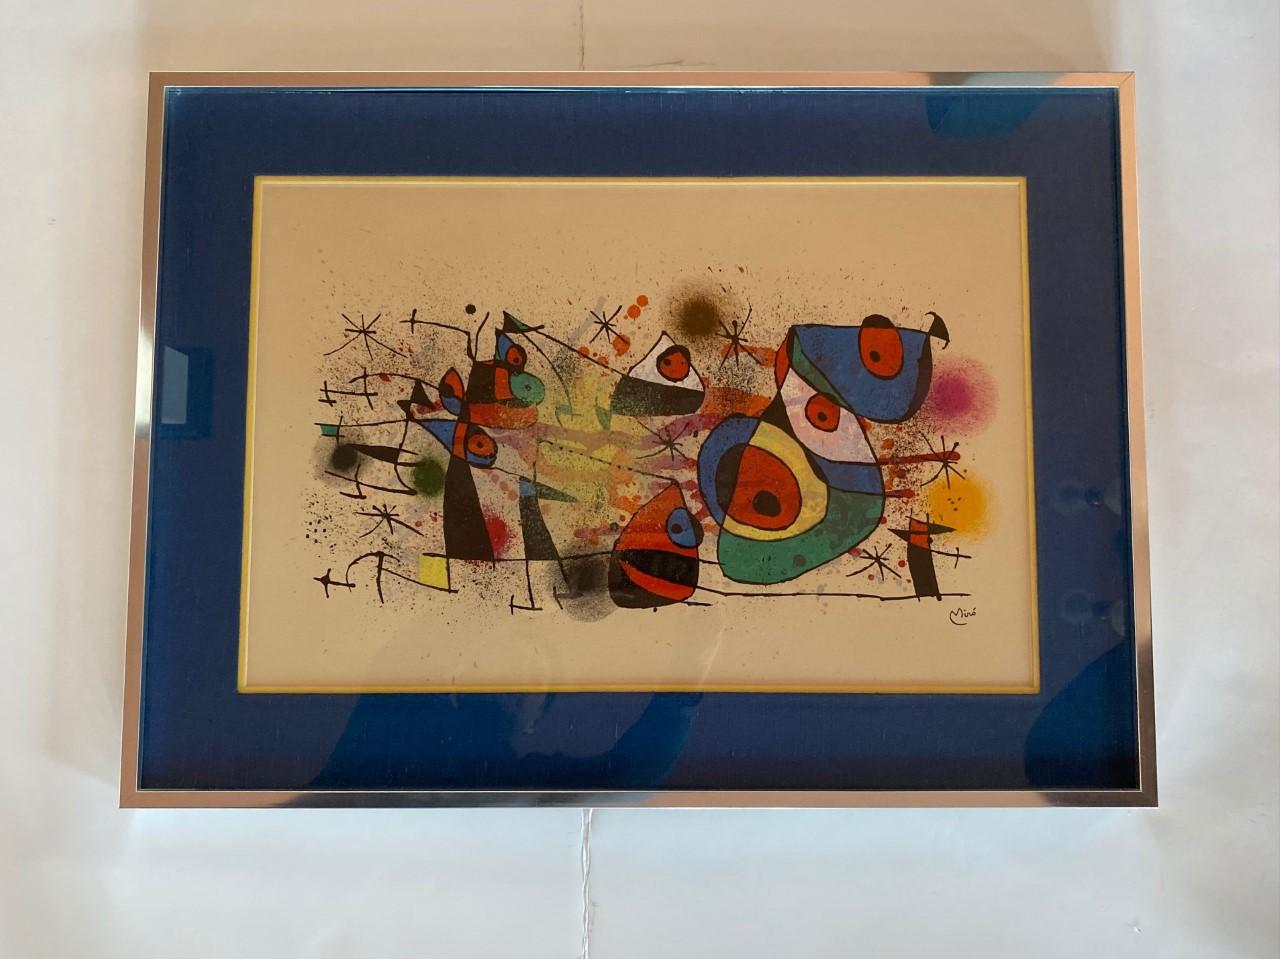 Joan Miró, Ceramiques, is an original Lithograph made in 1974. It has a printed signature in the lower right of the image. Published and Printed by Maeght, Paris. M.928.
Joan Miró was a widely considered one of the leading Surrealists, although he